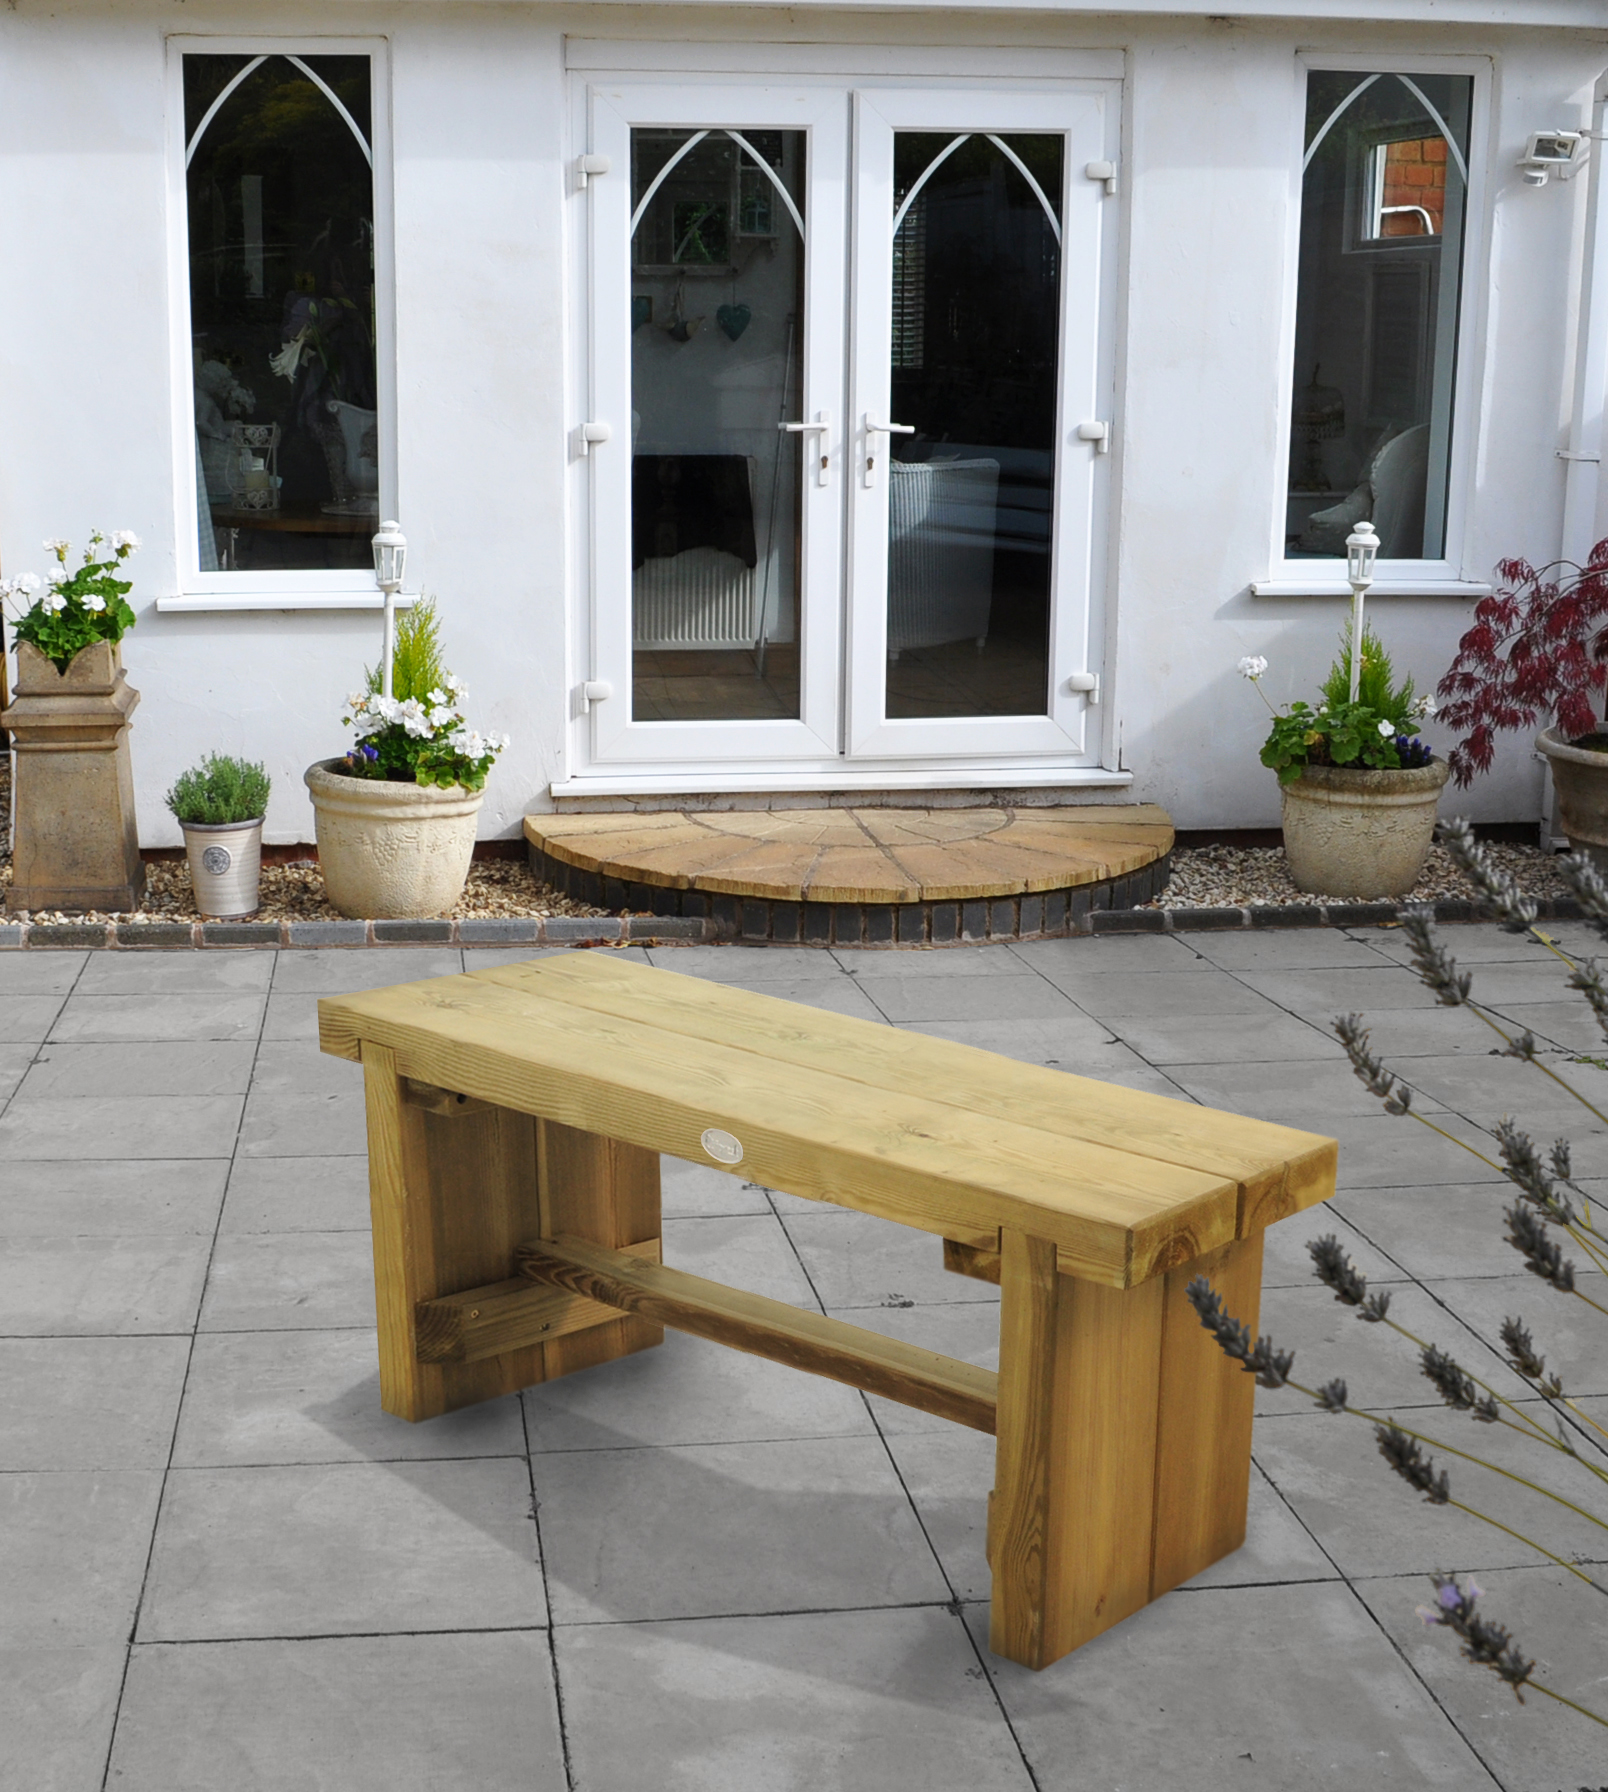 Image of Forest Garden Double Sleeper Bench - 1.2m